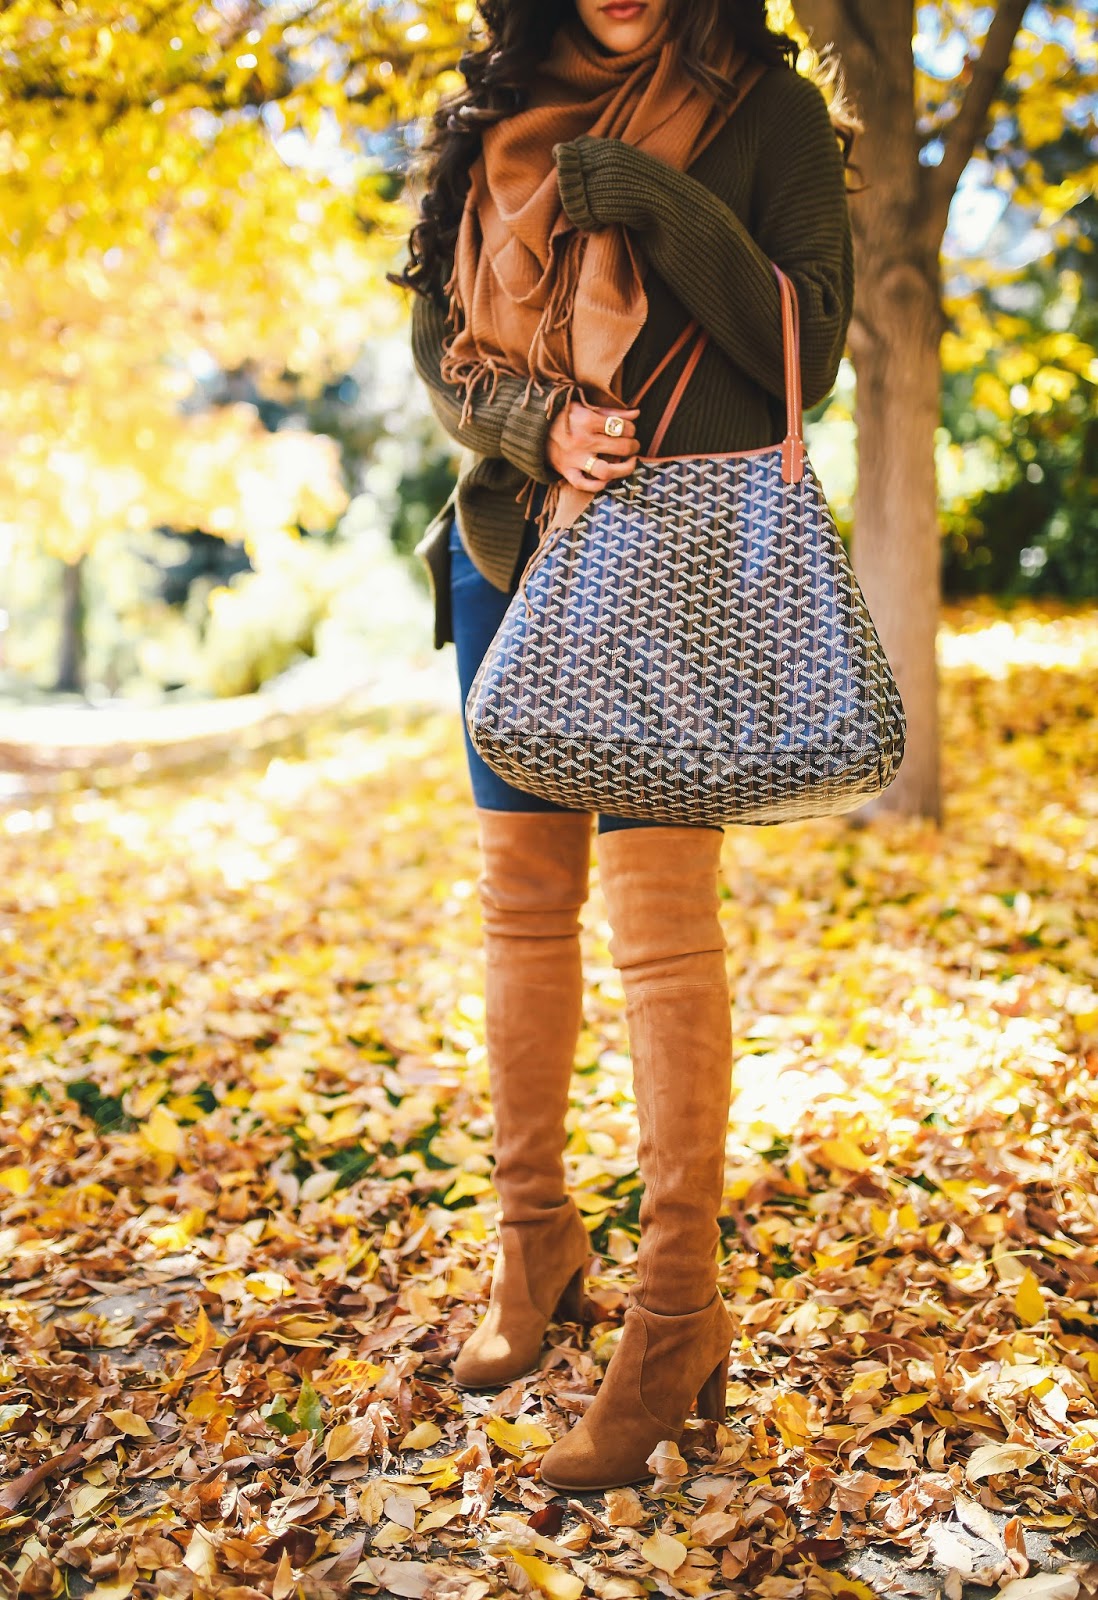 Over The Knee Boots in a Fall Wonderland, The Sweetest Thing